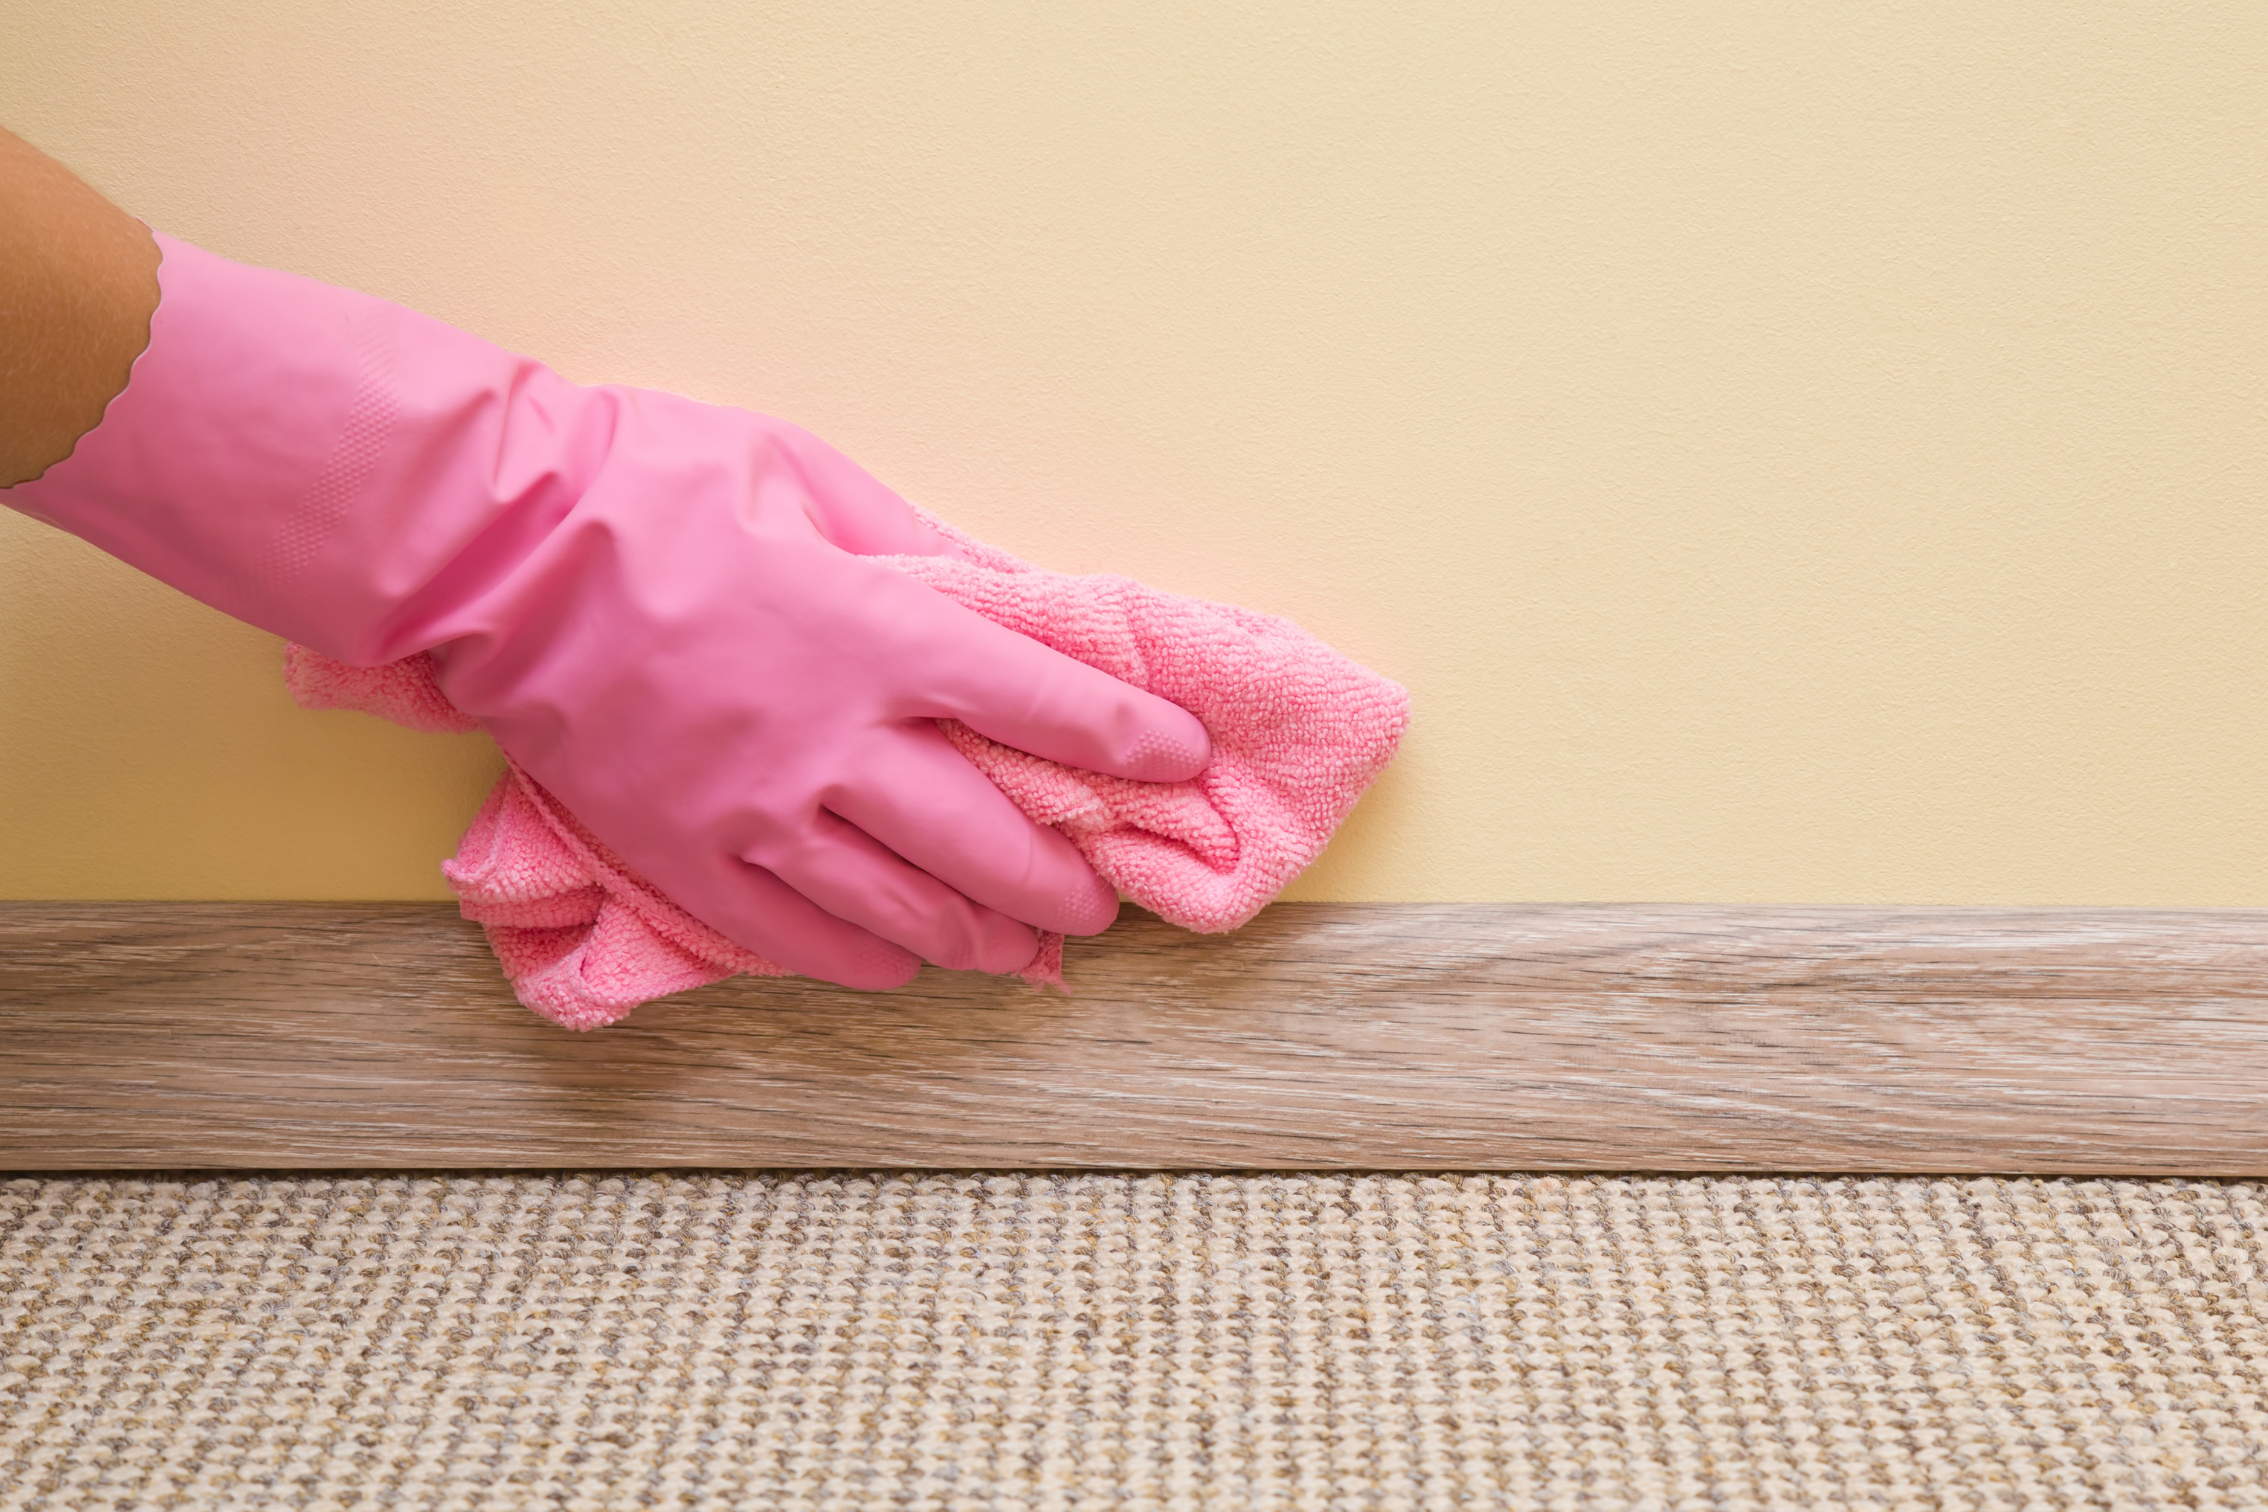 A gloved hand cleaning a wall prior to painting